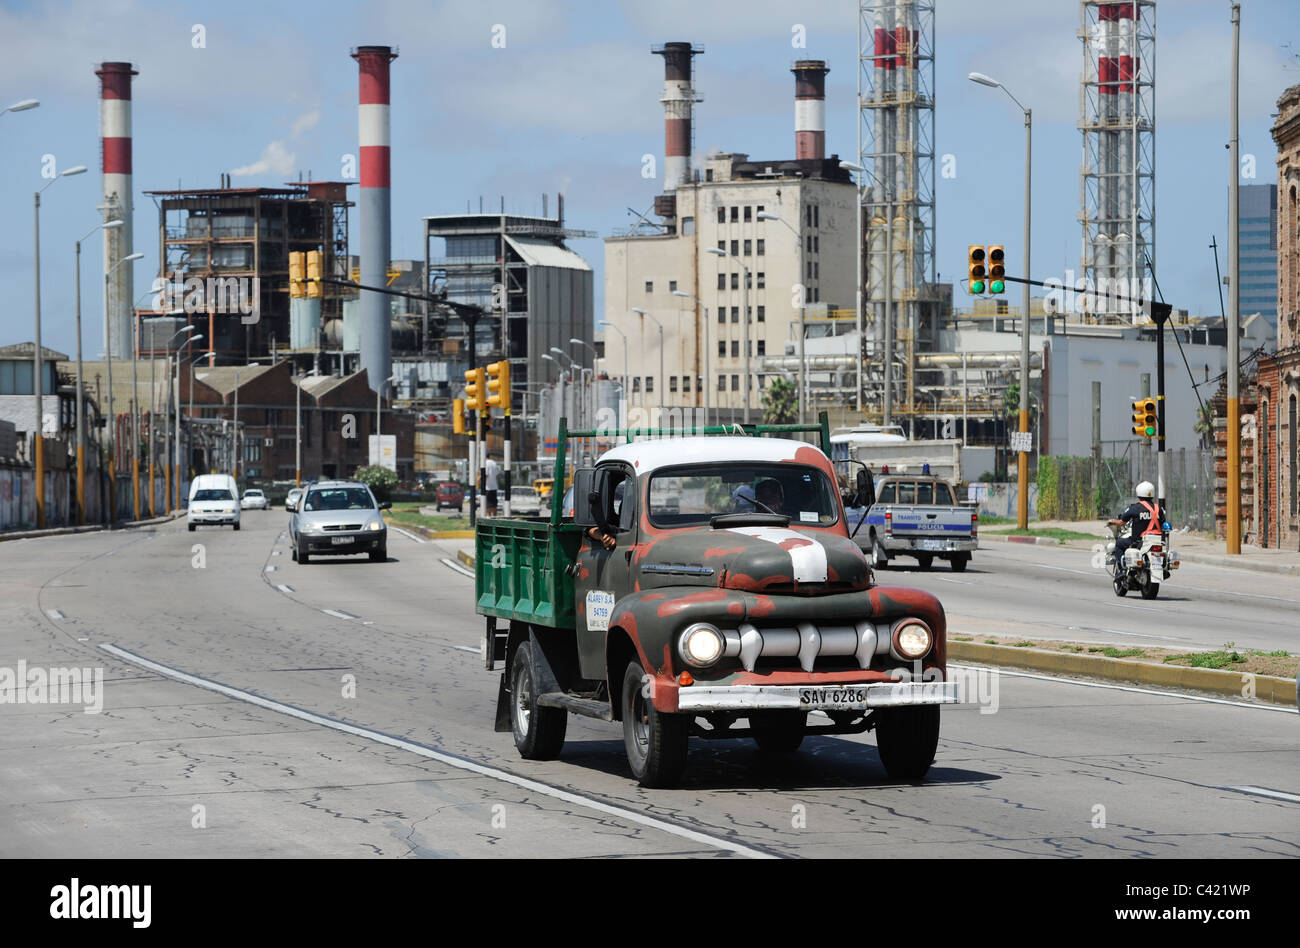 URUGUAY Montevideo , Diesel power station of UTE , the public energy company, and old Ford pick-up vehicle Stock Photo